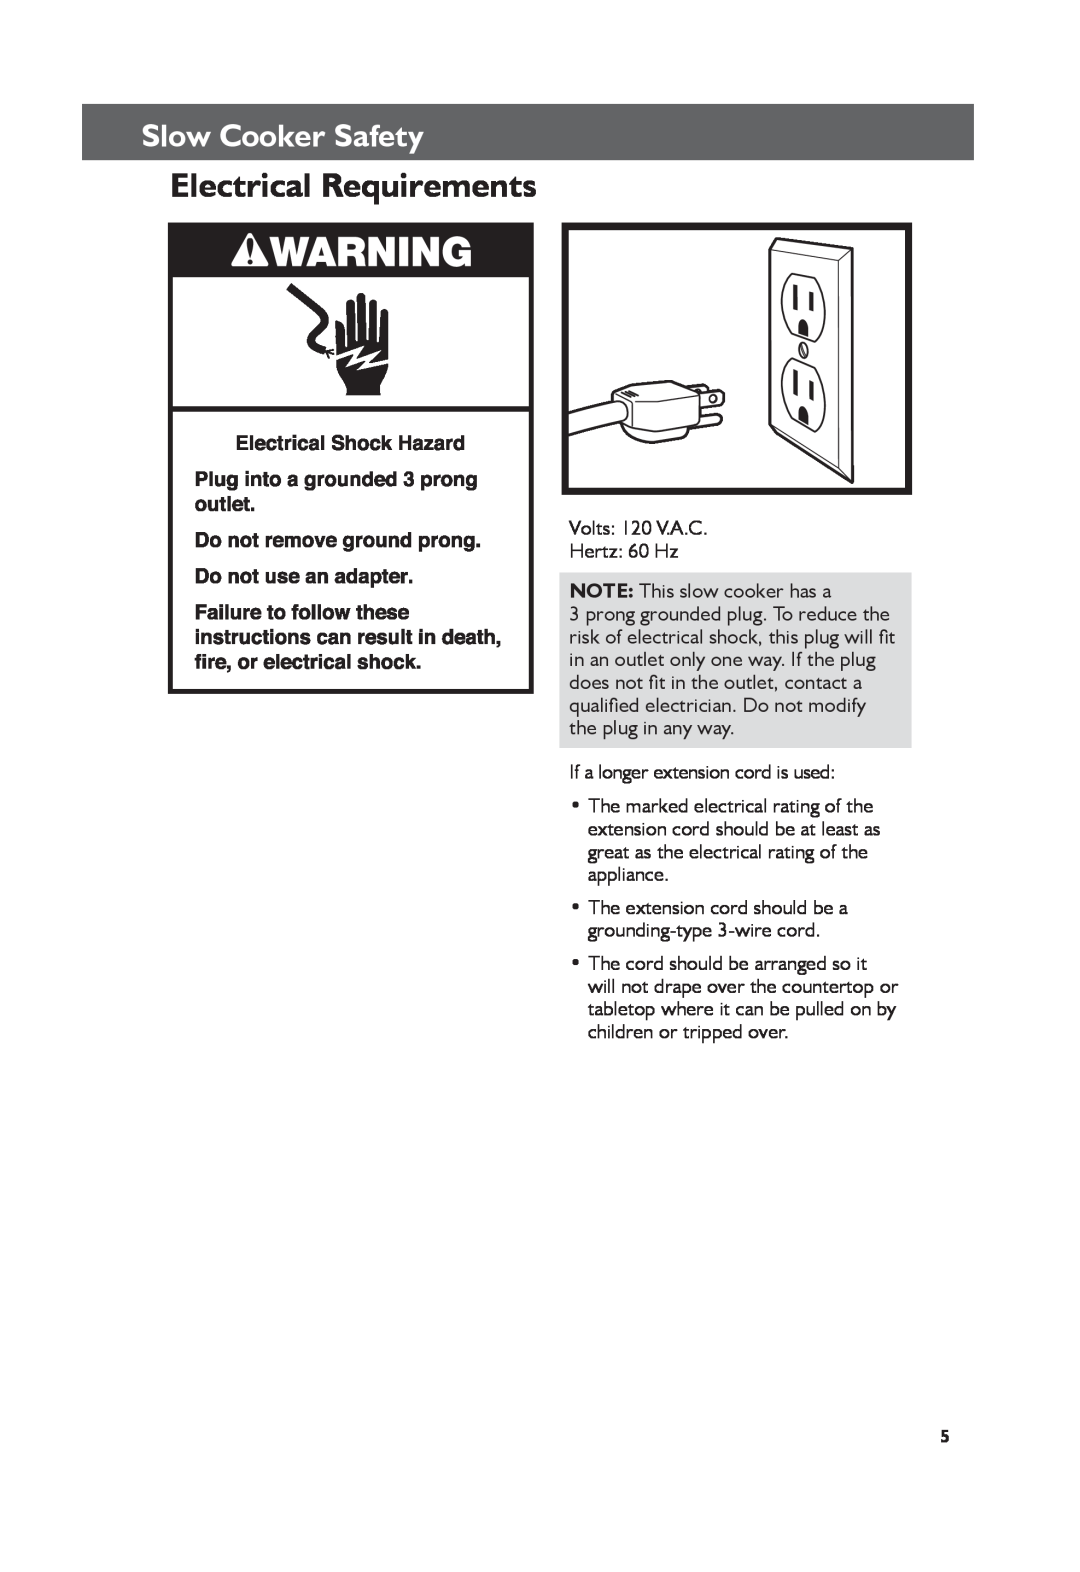 KitchenAid KSC6223, KSC6222 manual Electrical Requirements, Slow Cooker Safety 